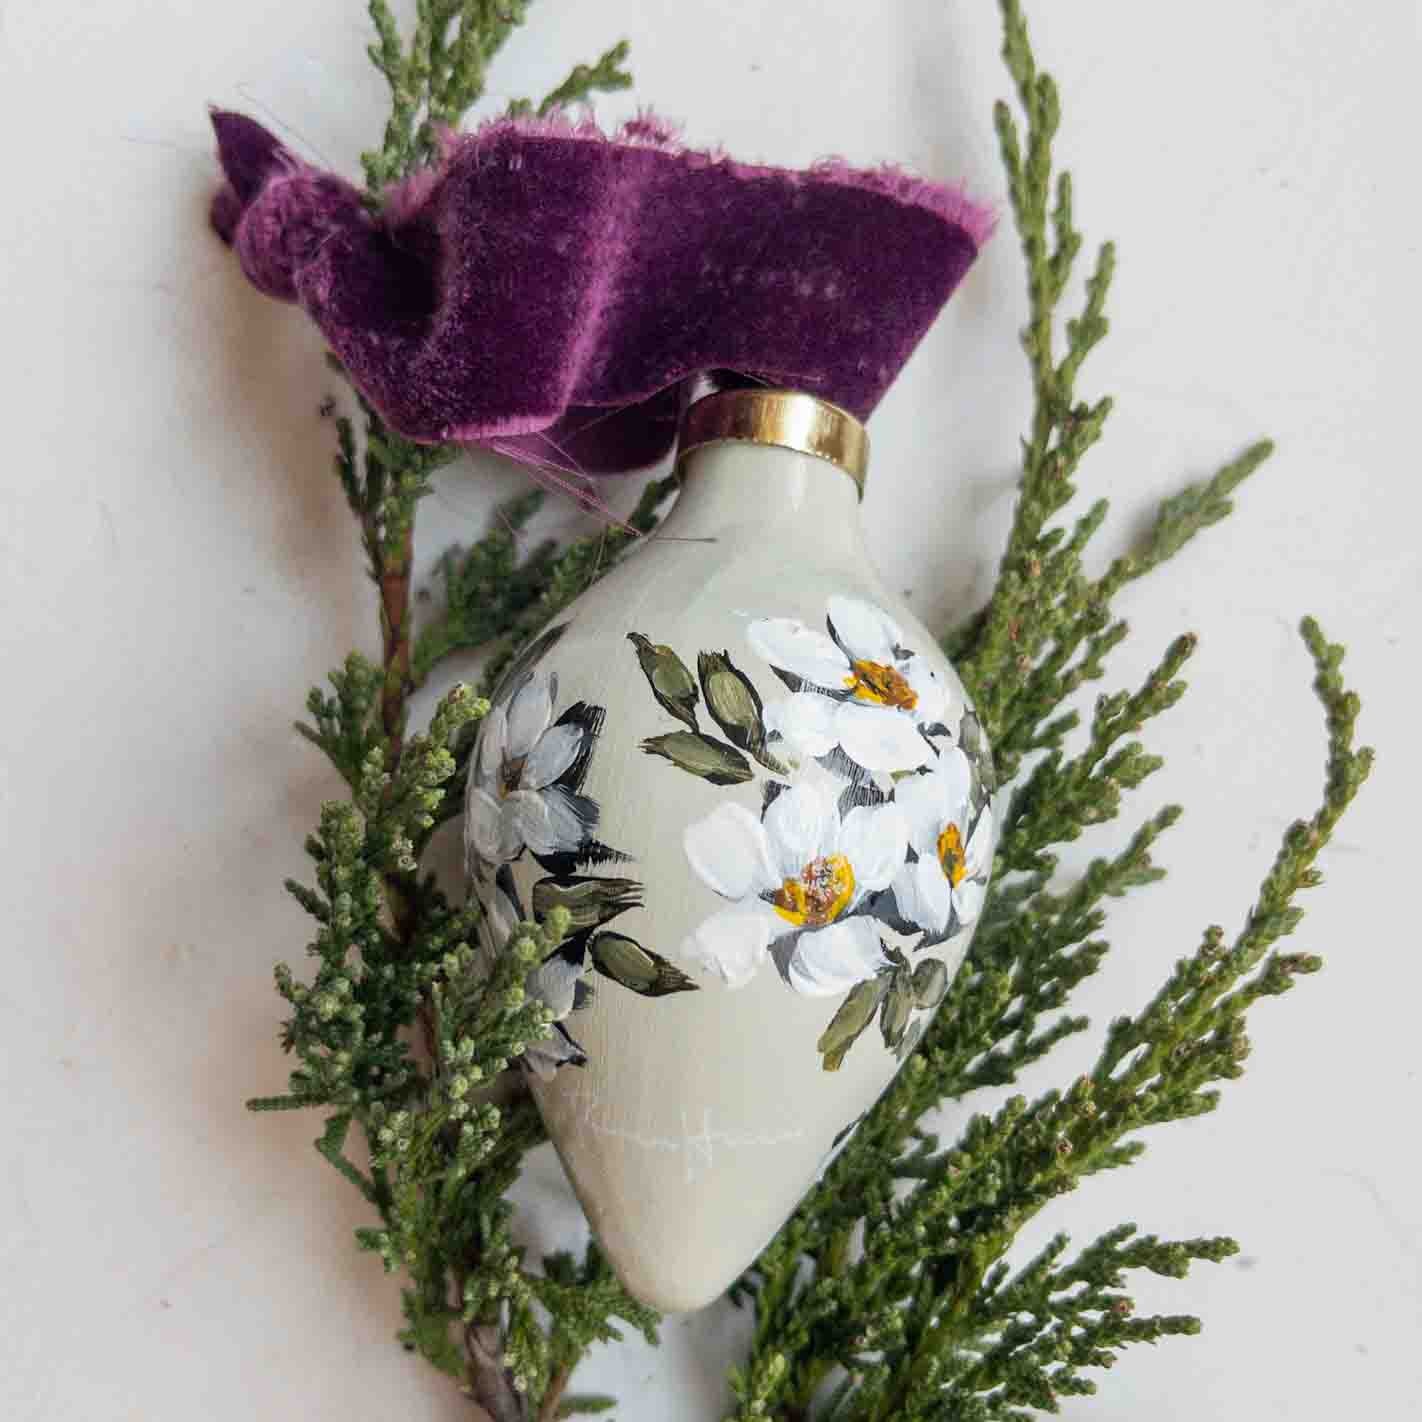 Heirloom Ornament - Floral 29